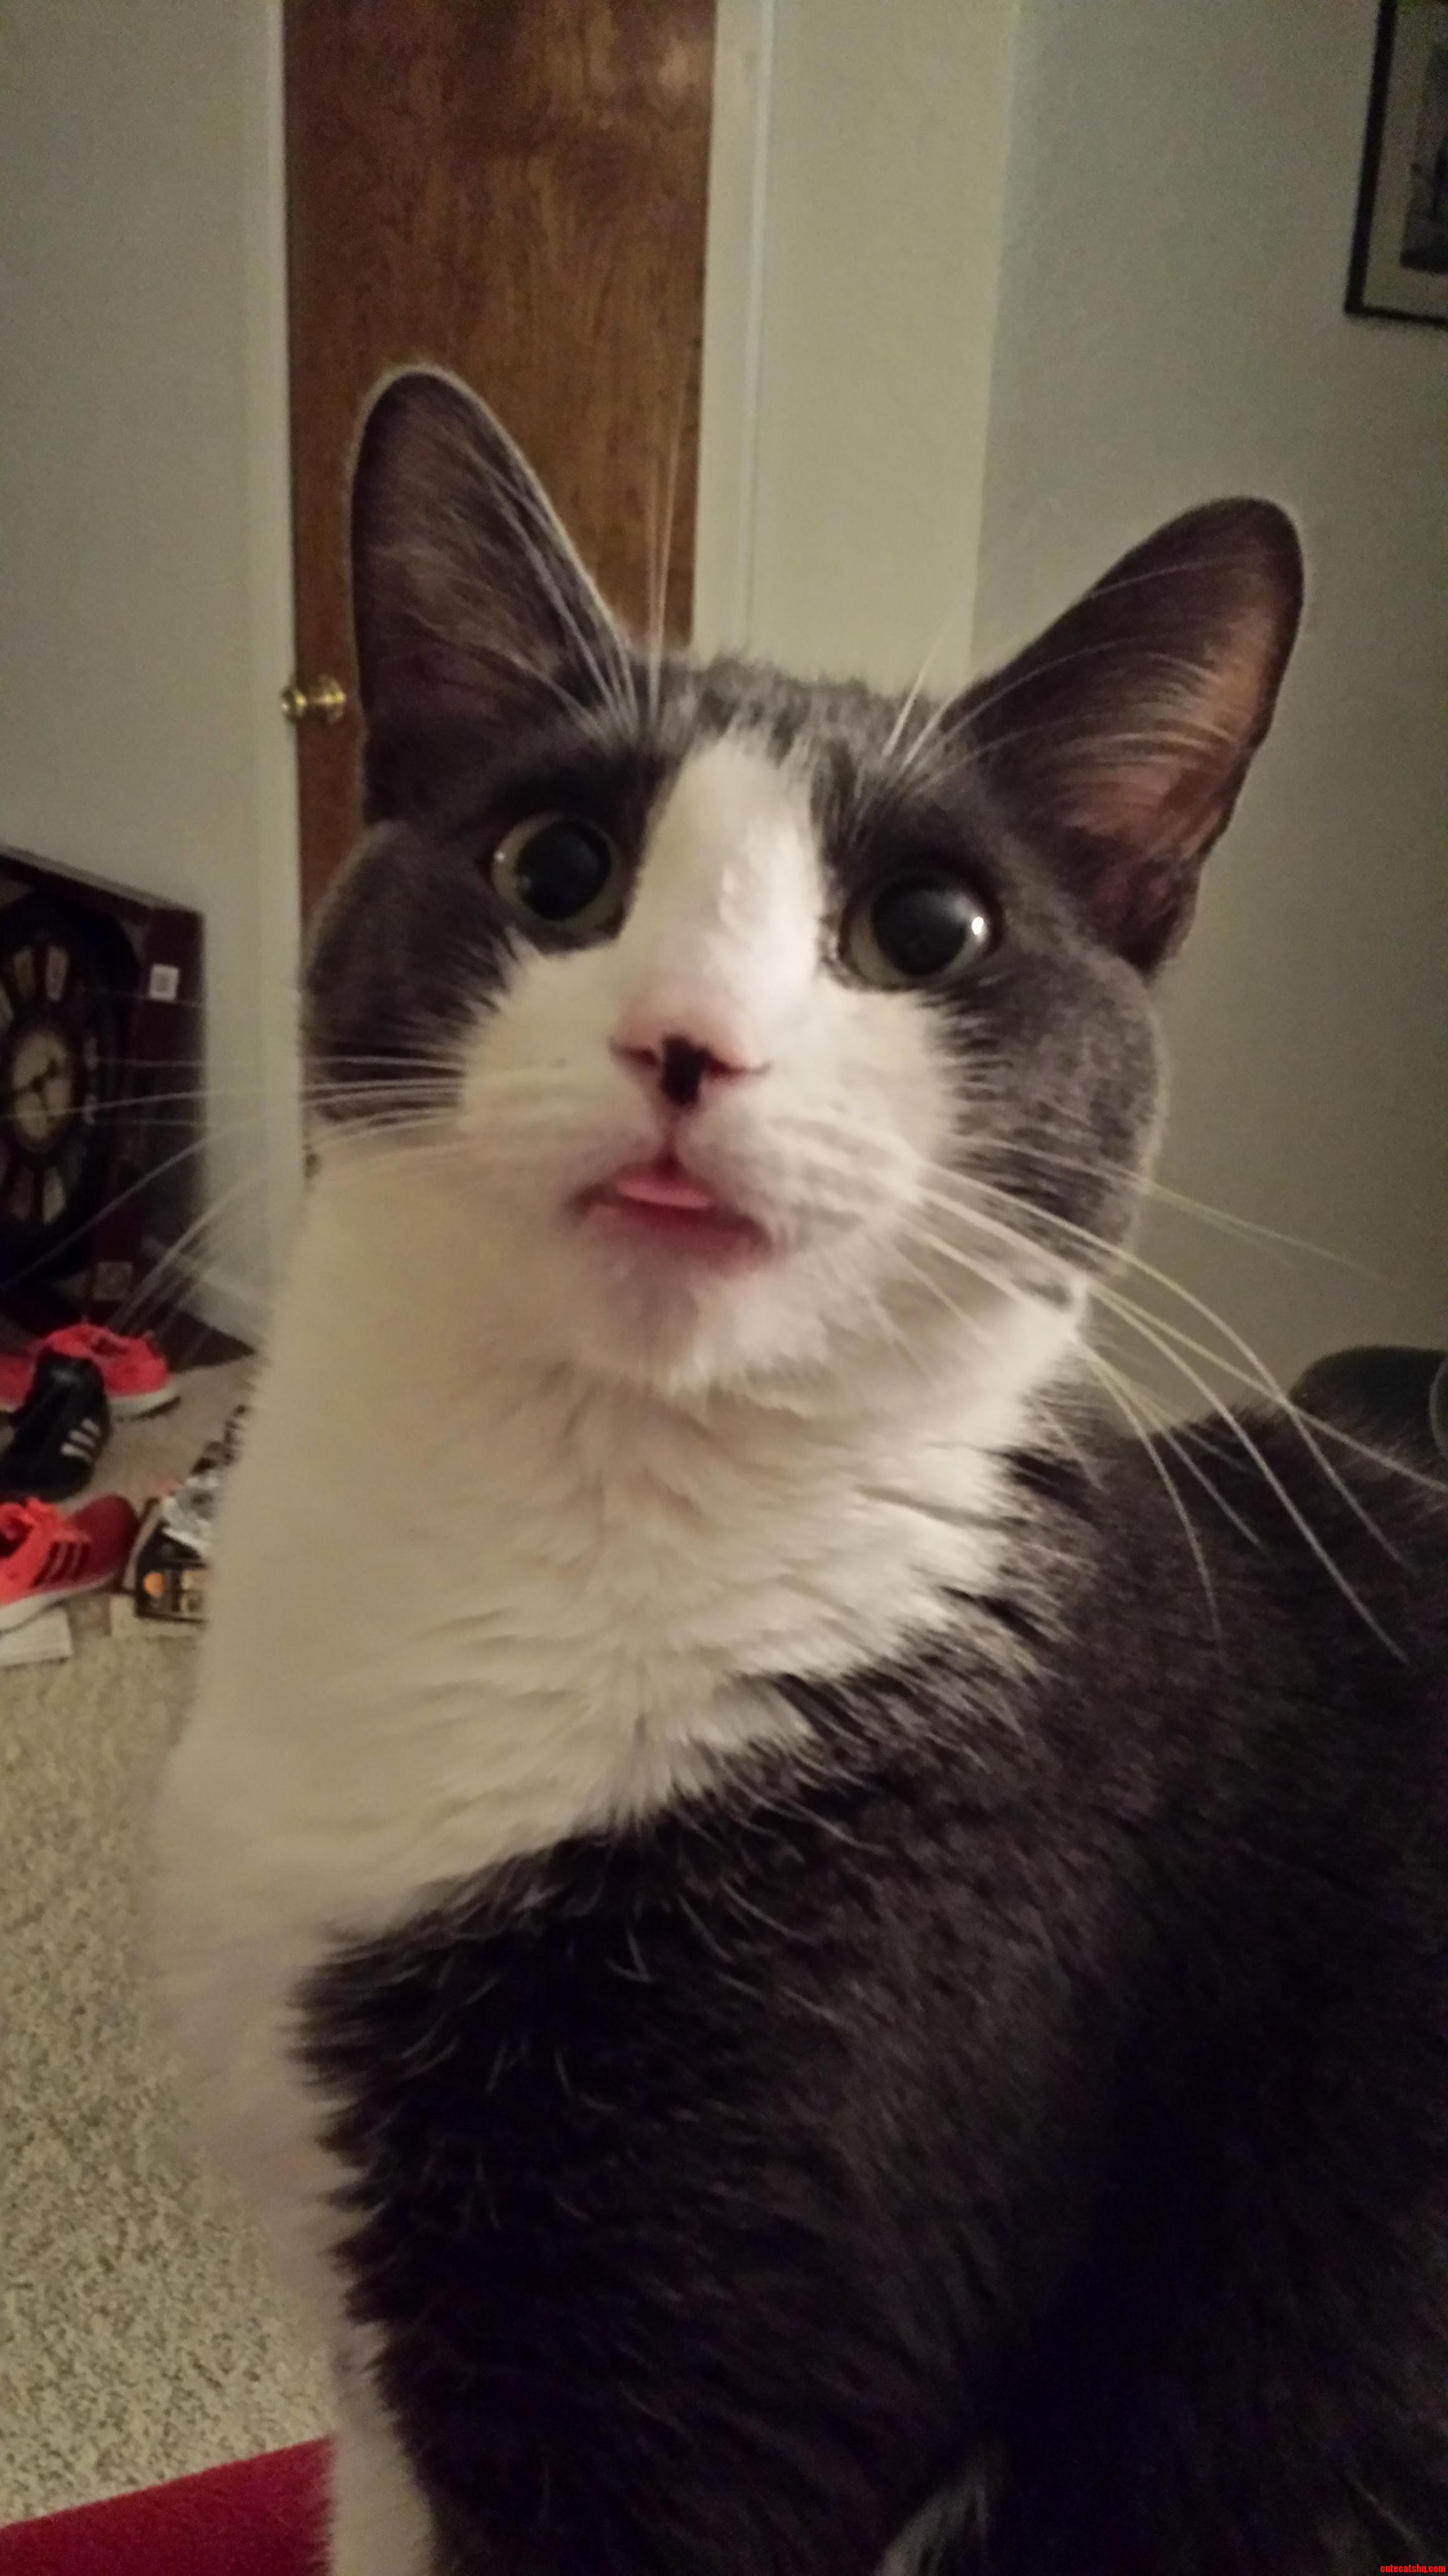 Is There Anything More Adorable Than A Cat With Its Tongue Out